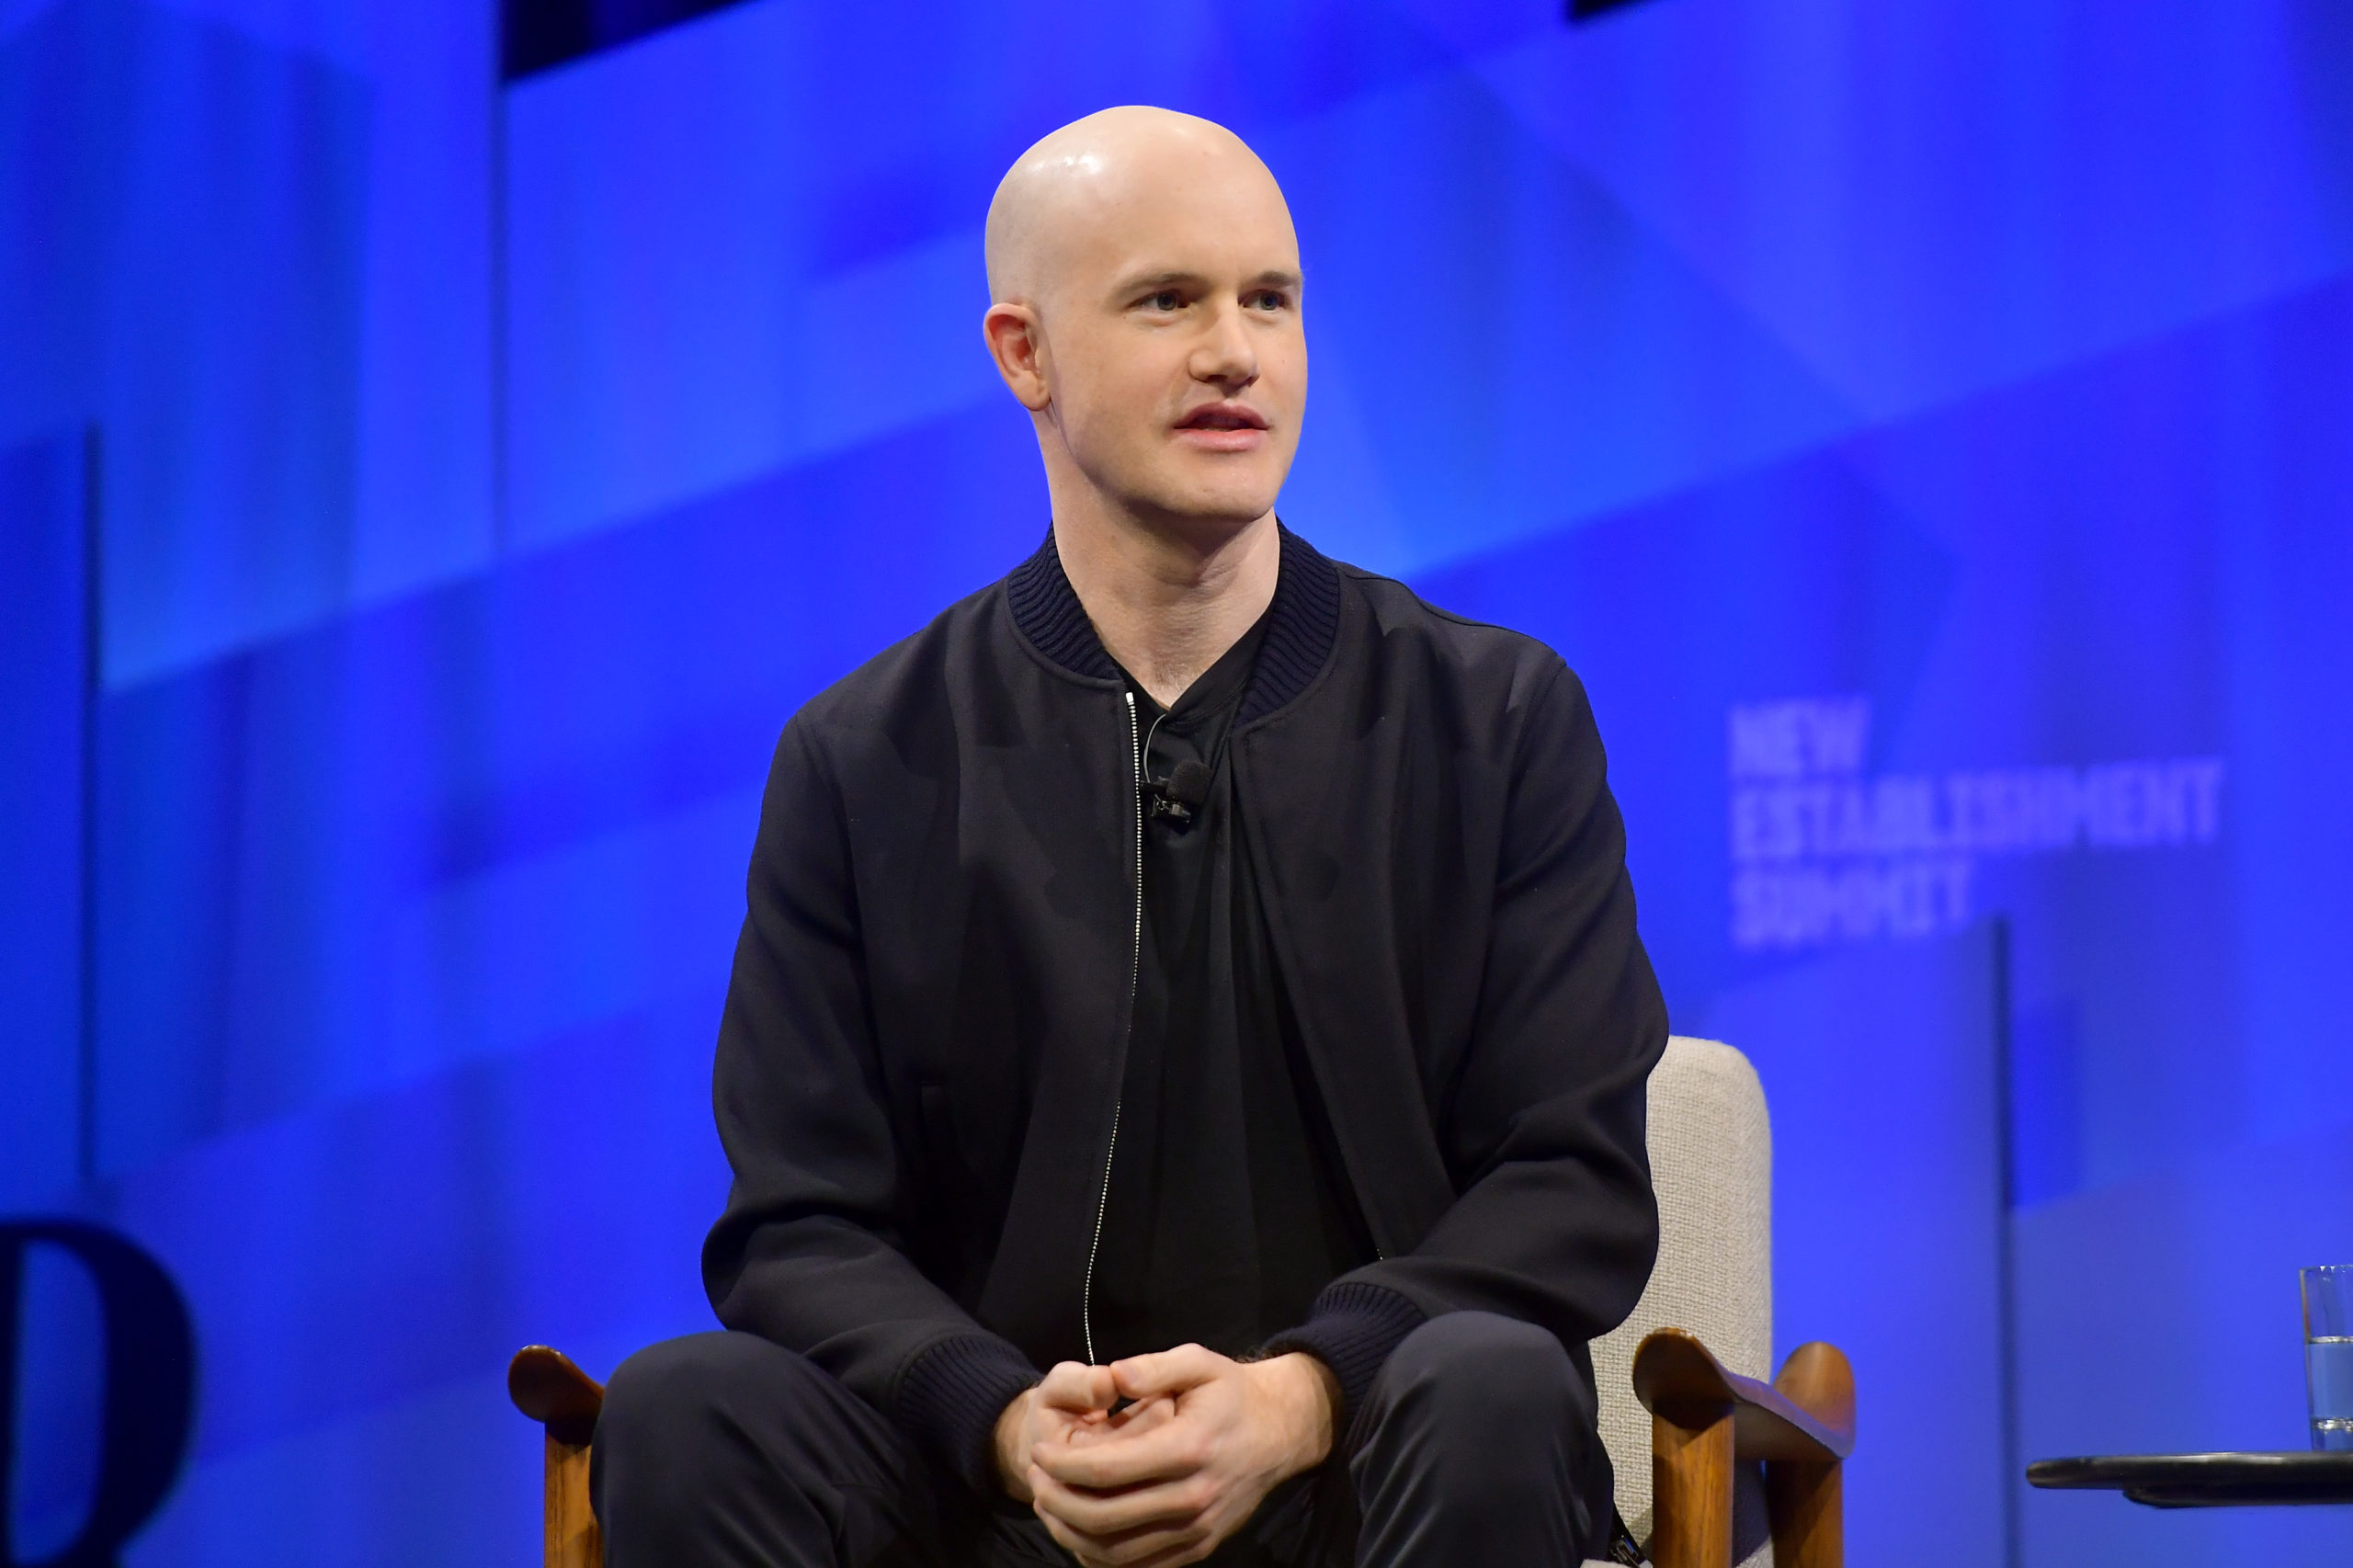 Coinbase's near-term outlook is 'still grim', JPMorgan says, while BofA is more positive about firm's ability to face crypto winter